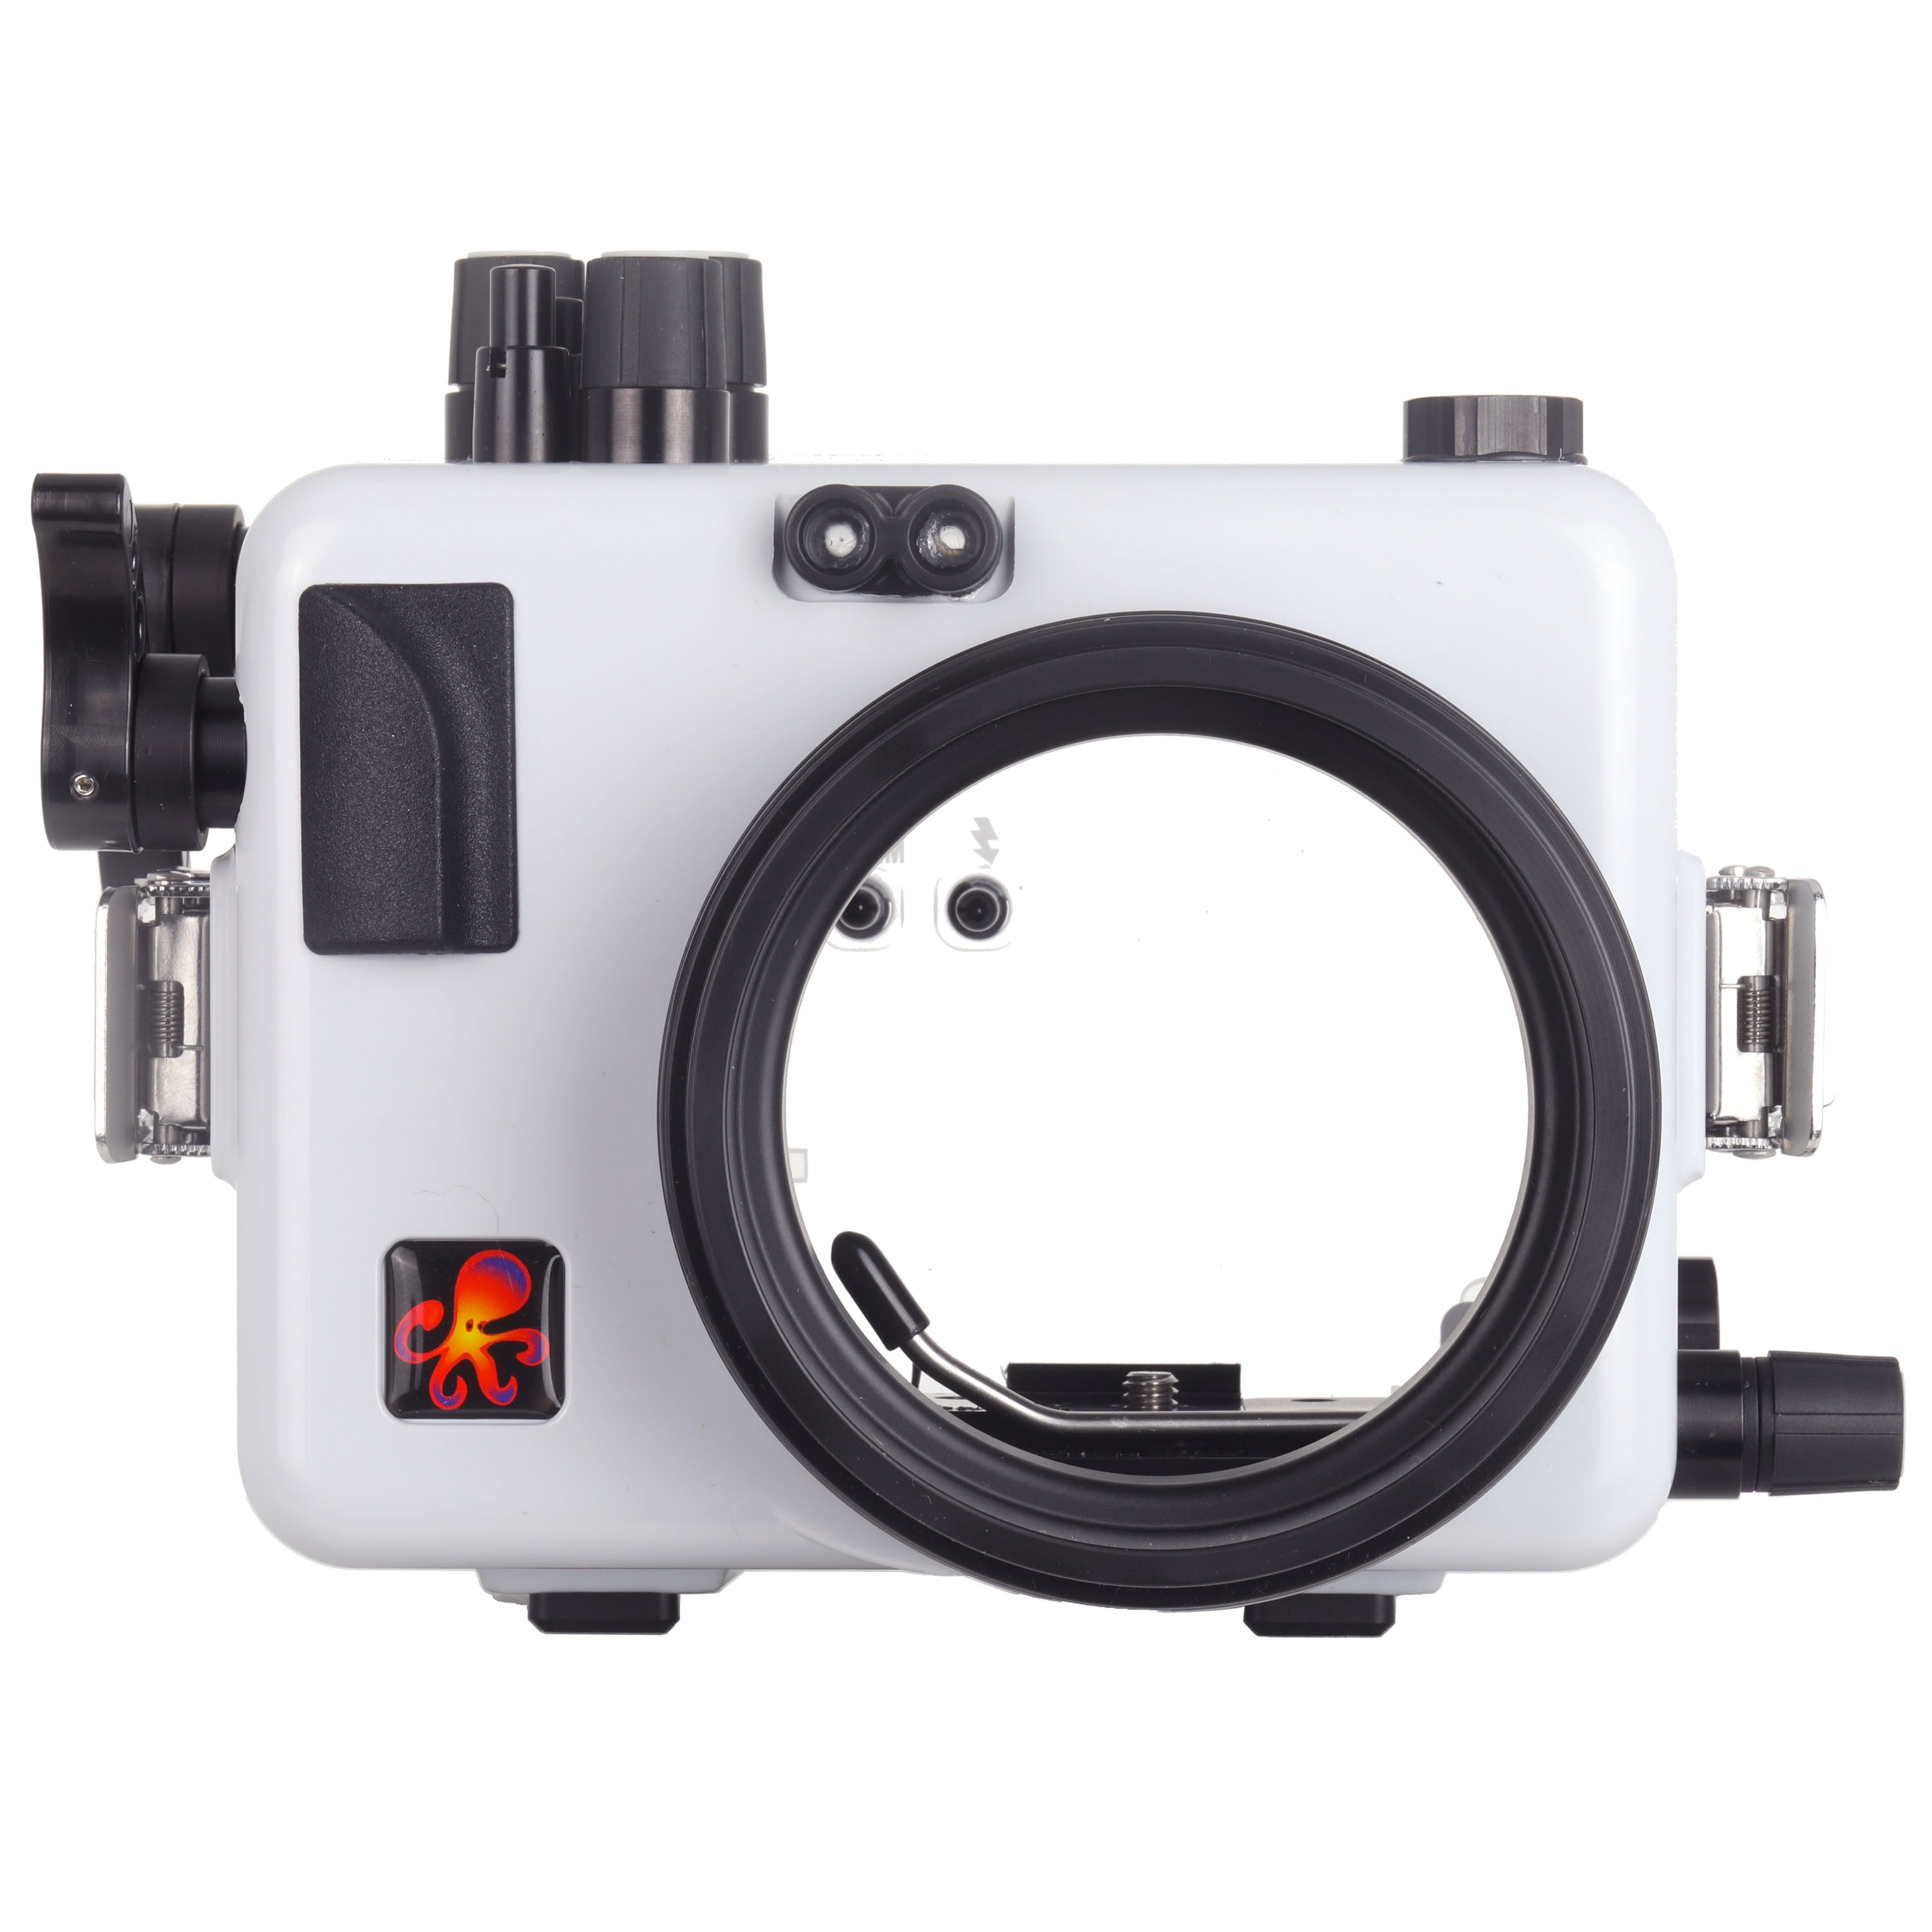 Ikelite 200DLM/A Underwater Housing for Sony Alpha a6100, a6300, a6400, a6500 Mirrorless Cameras